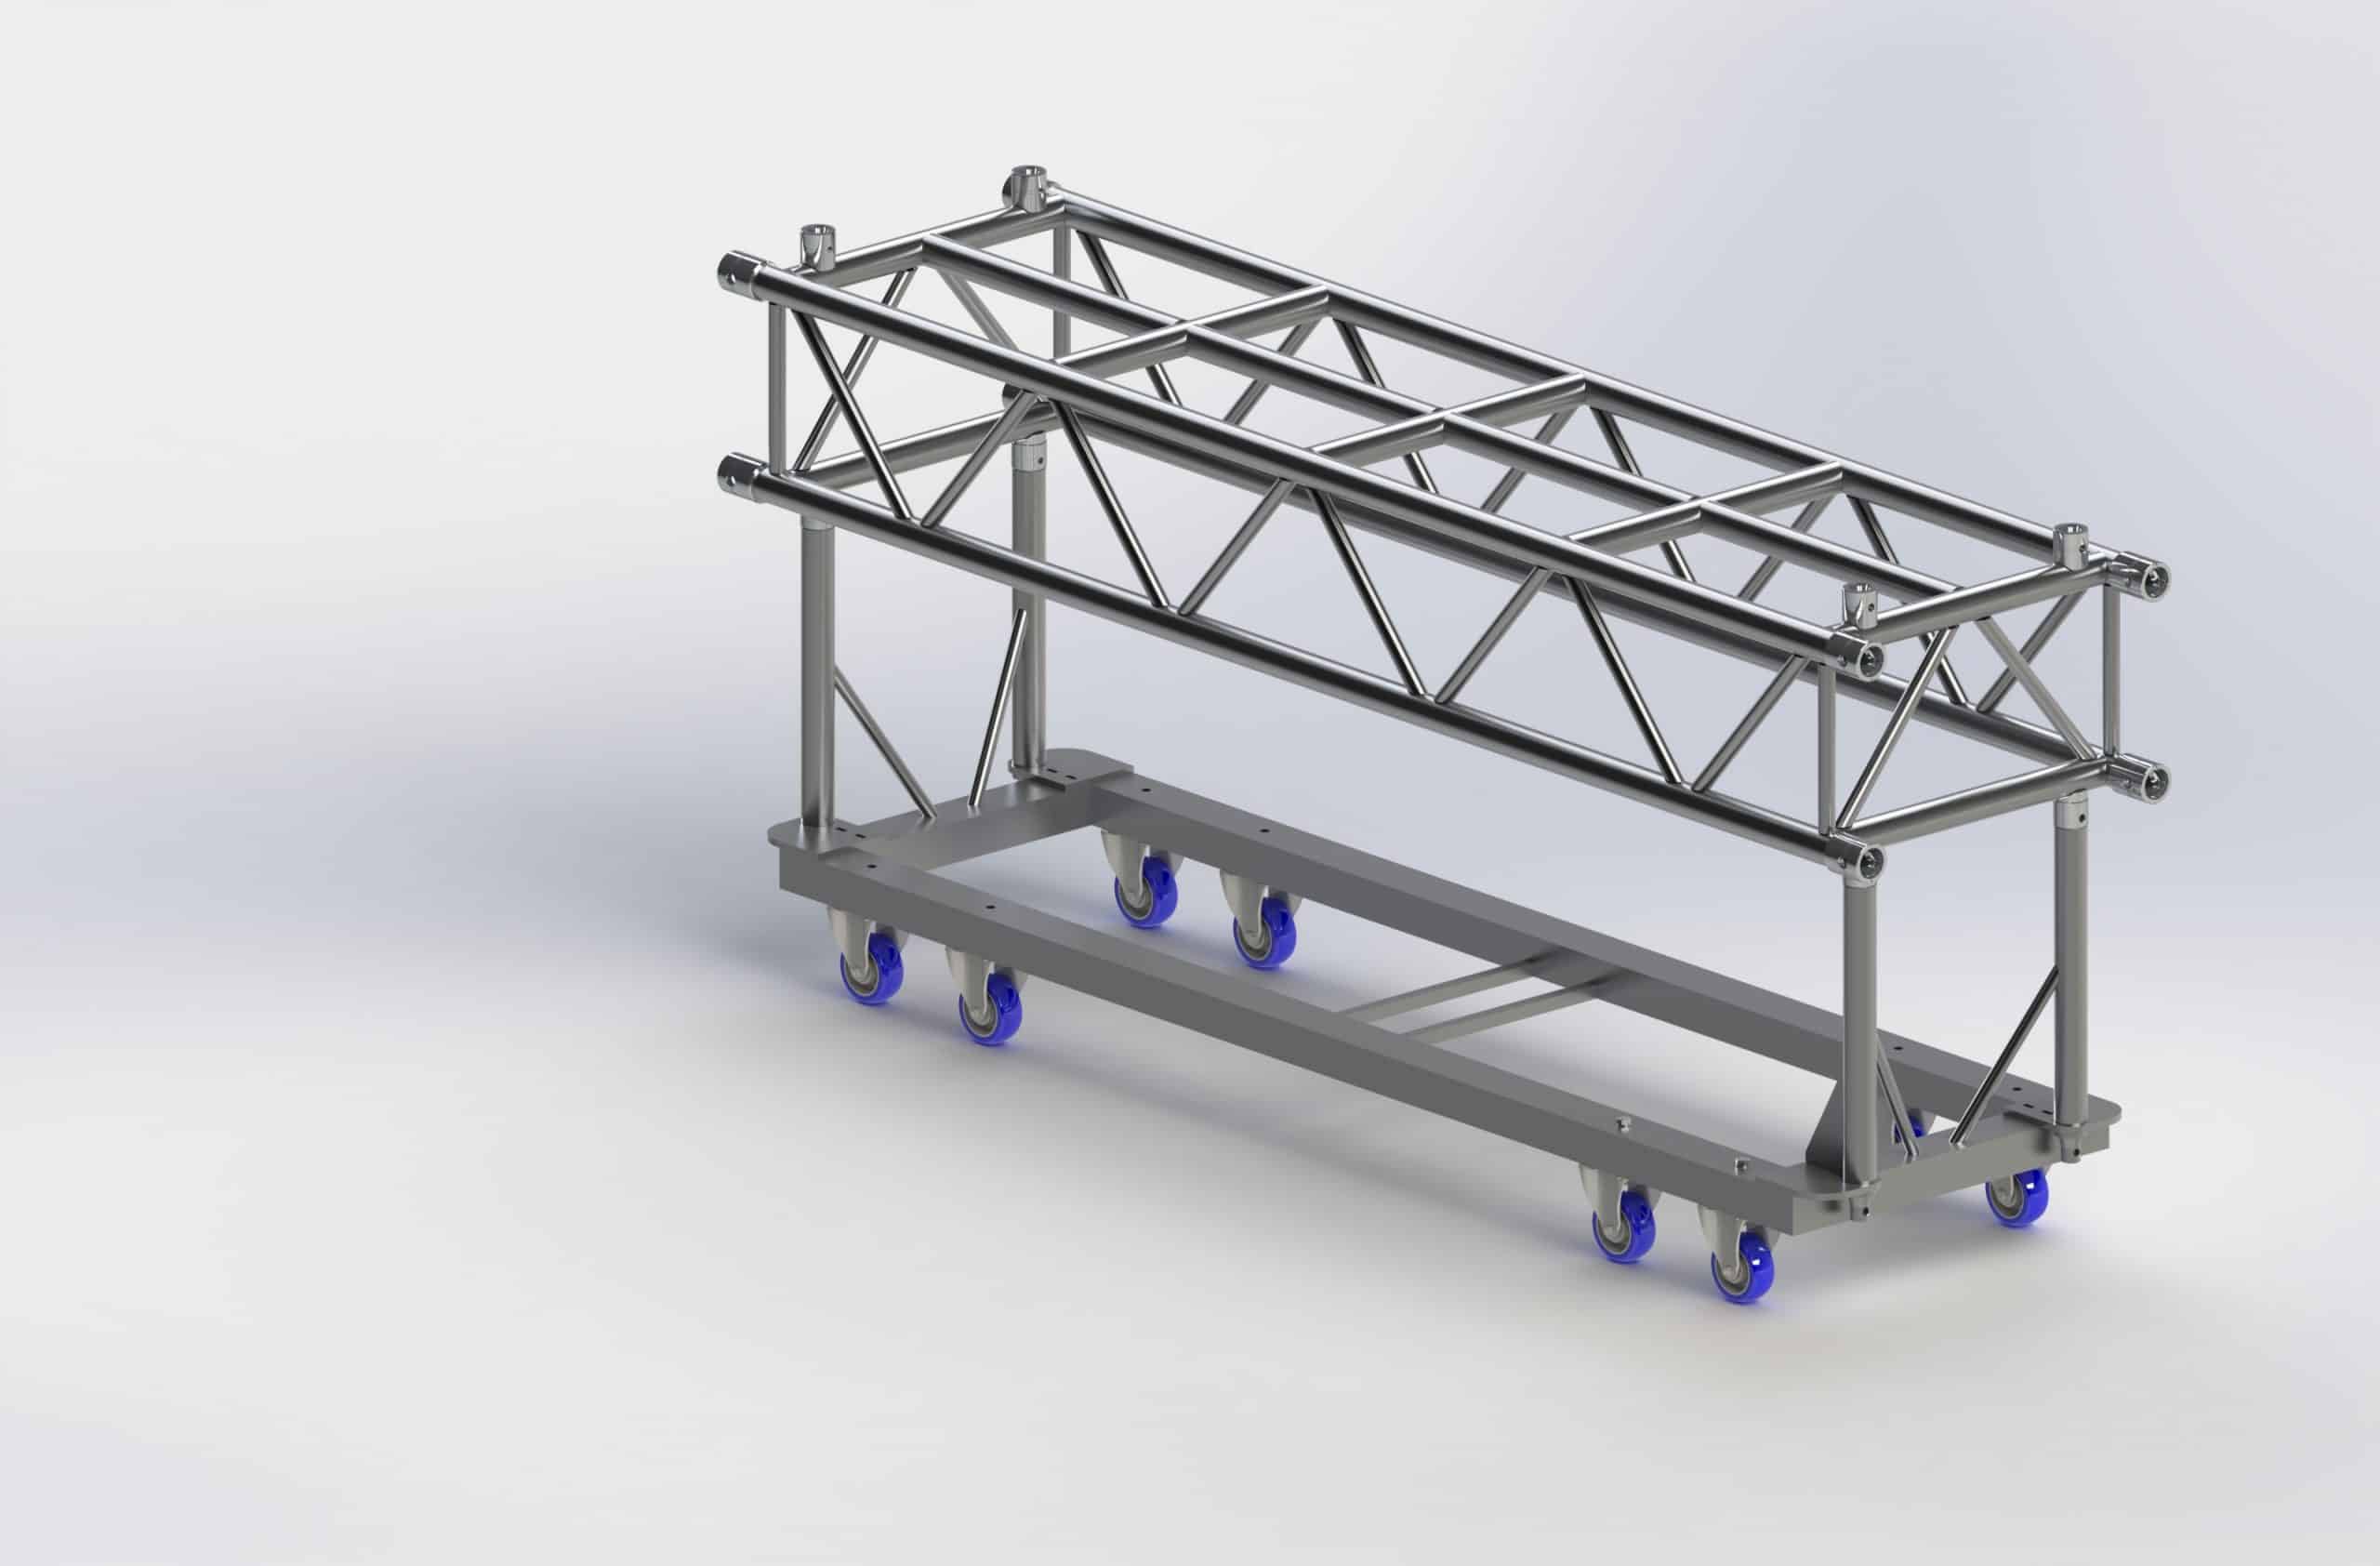 Hire a professional truss system from Riggingbox